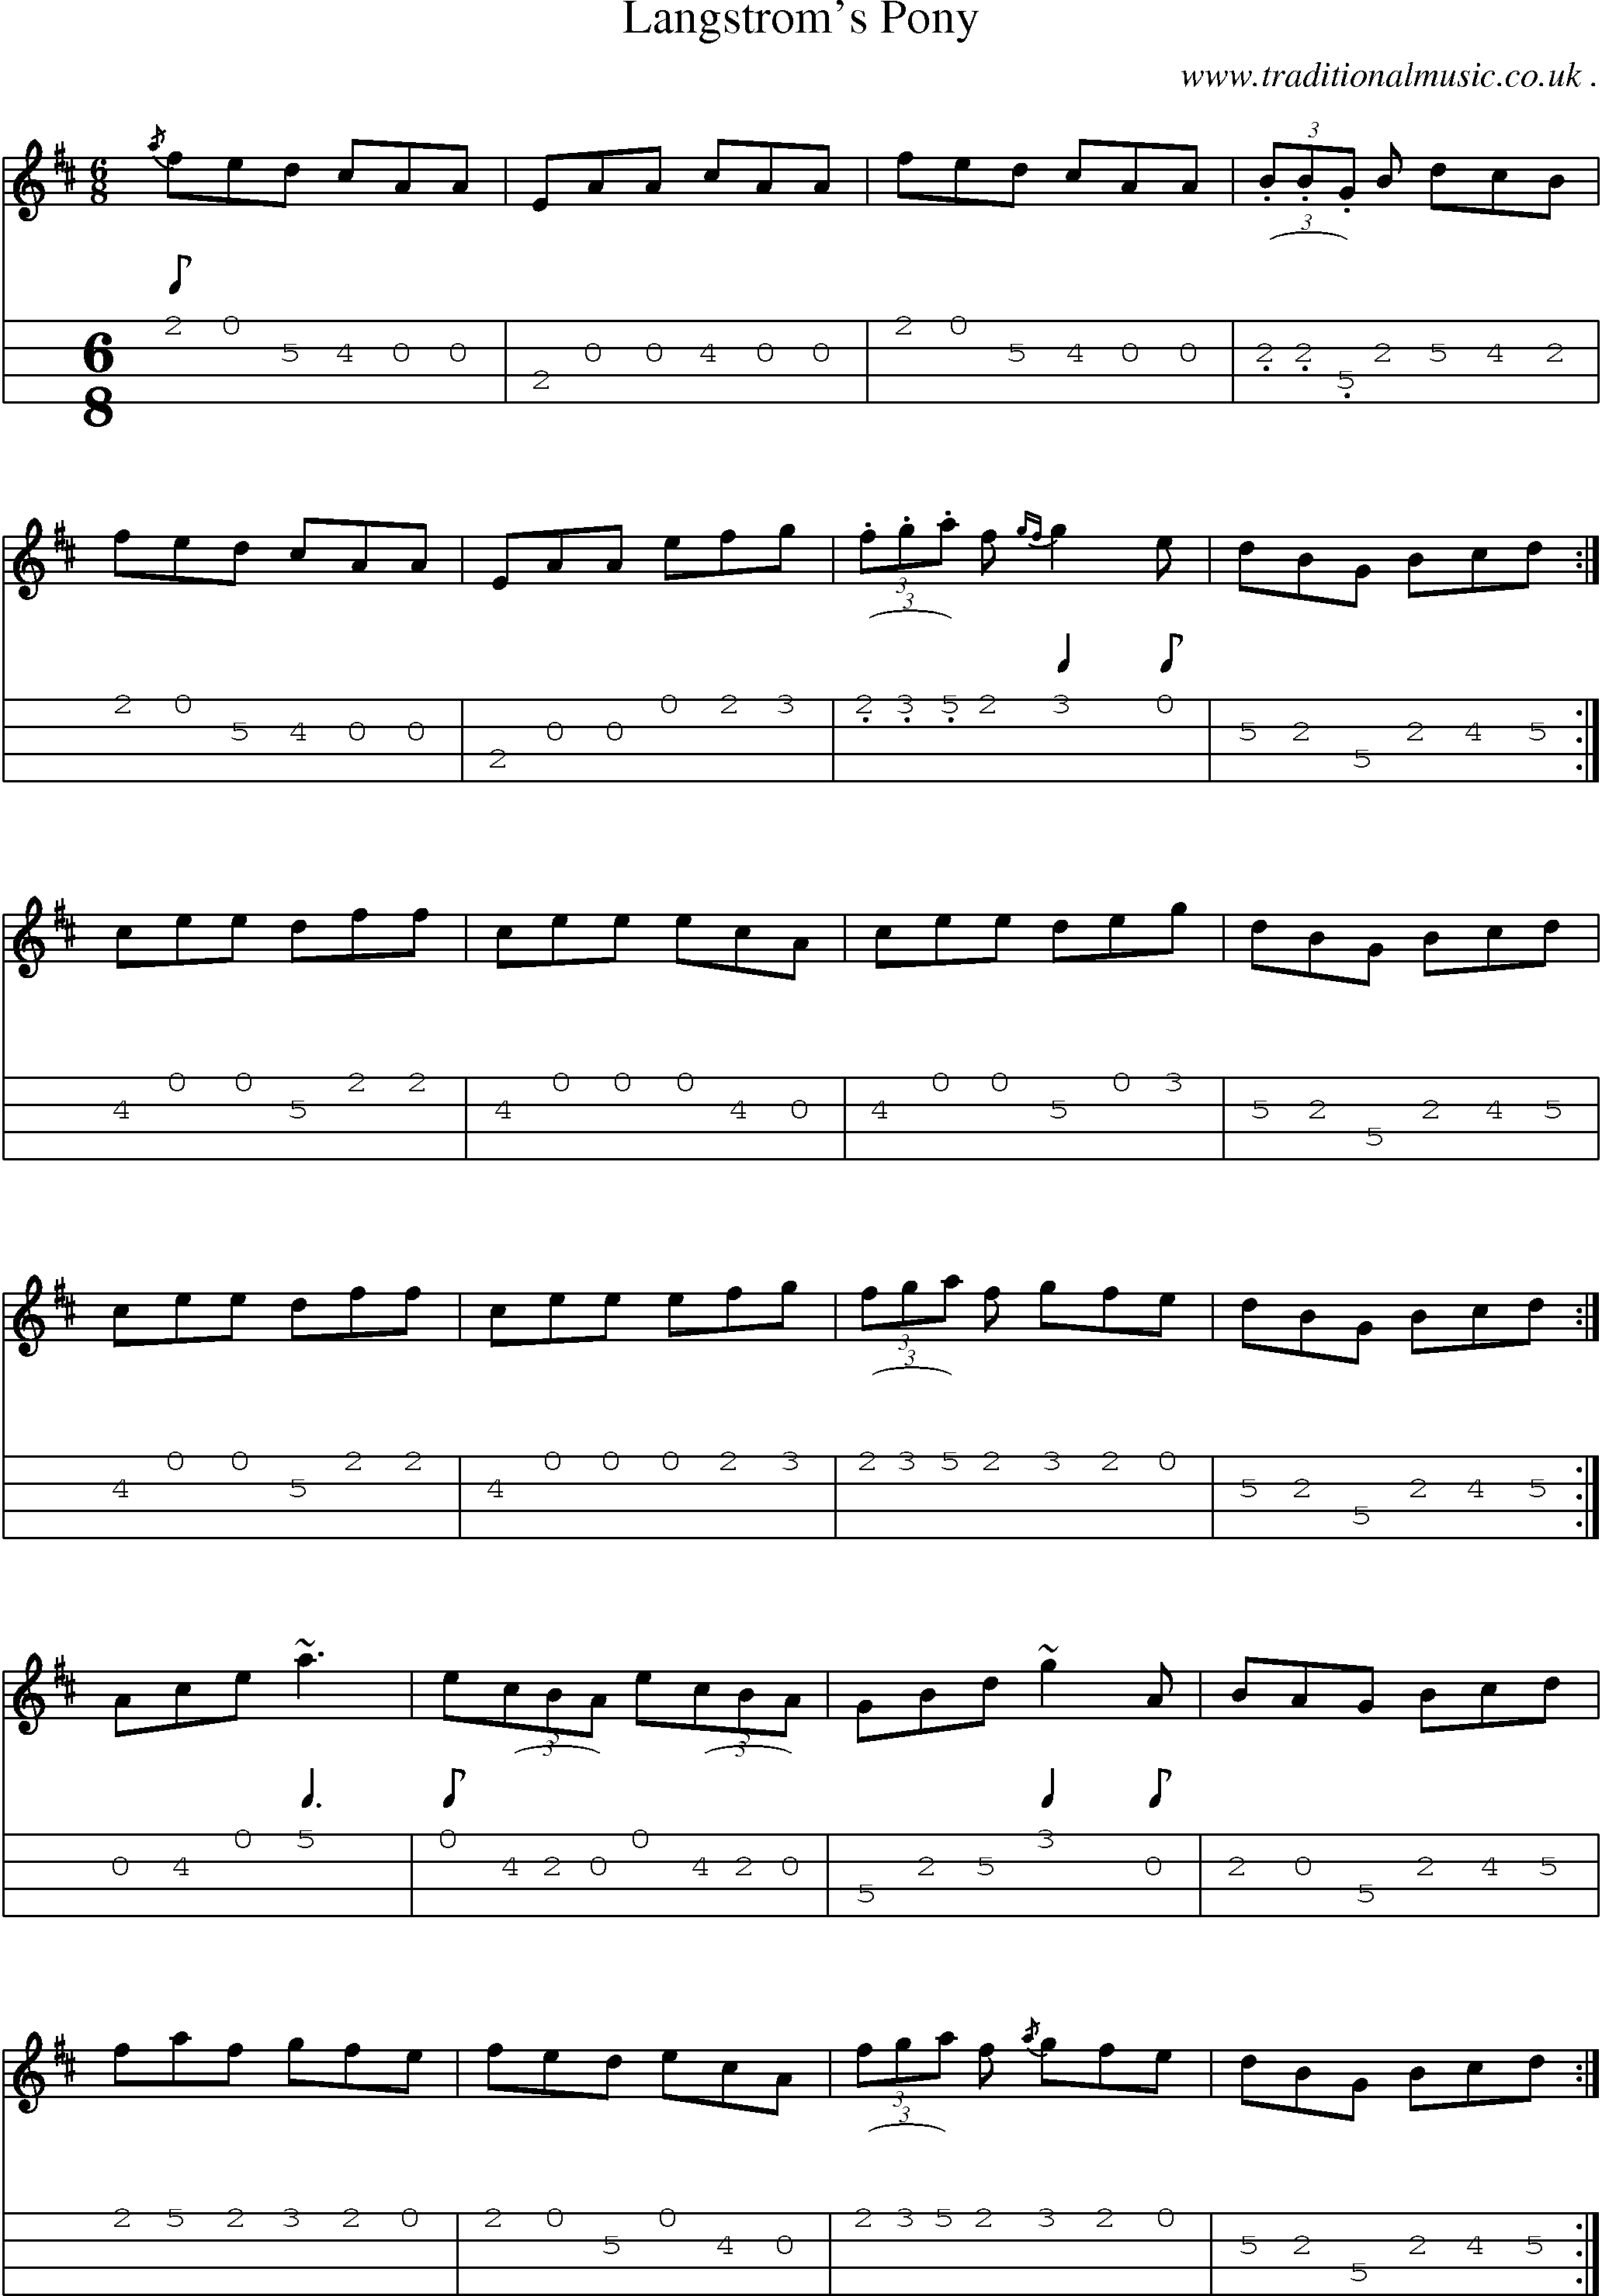 Sheet-music  score, Chords and Mandolin Tabs for Langstroms Pony